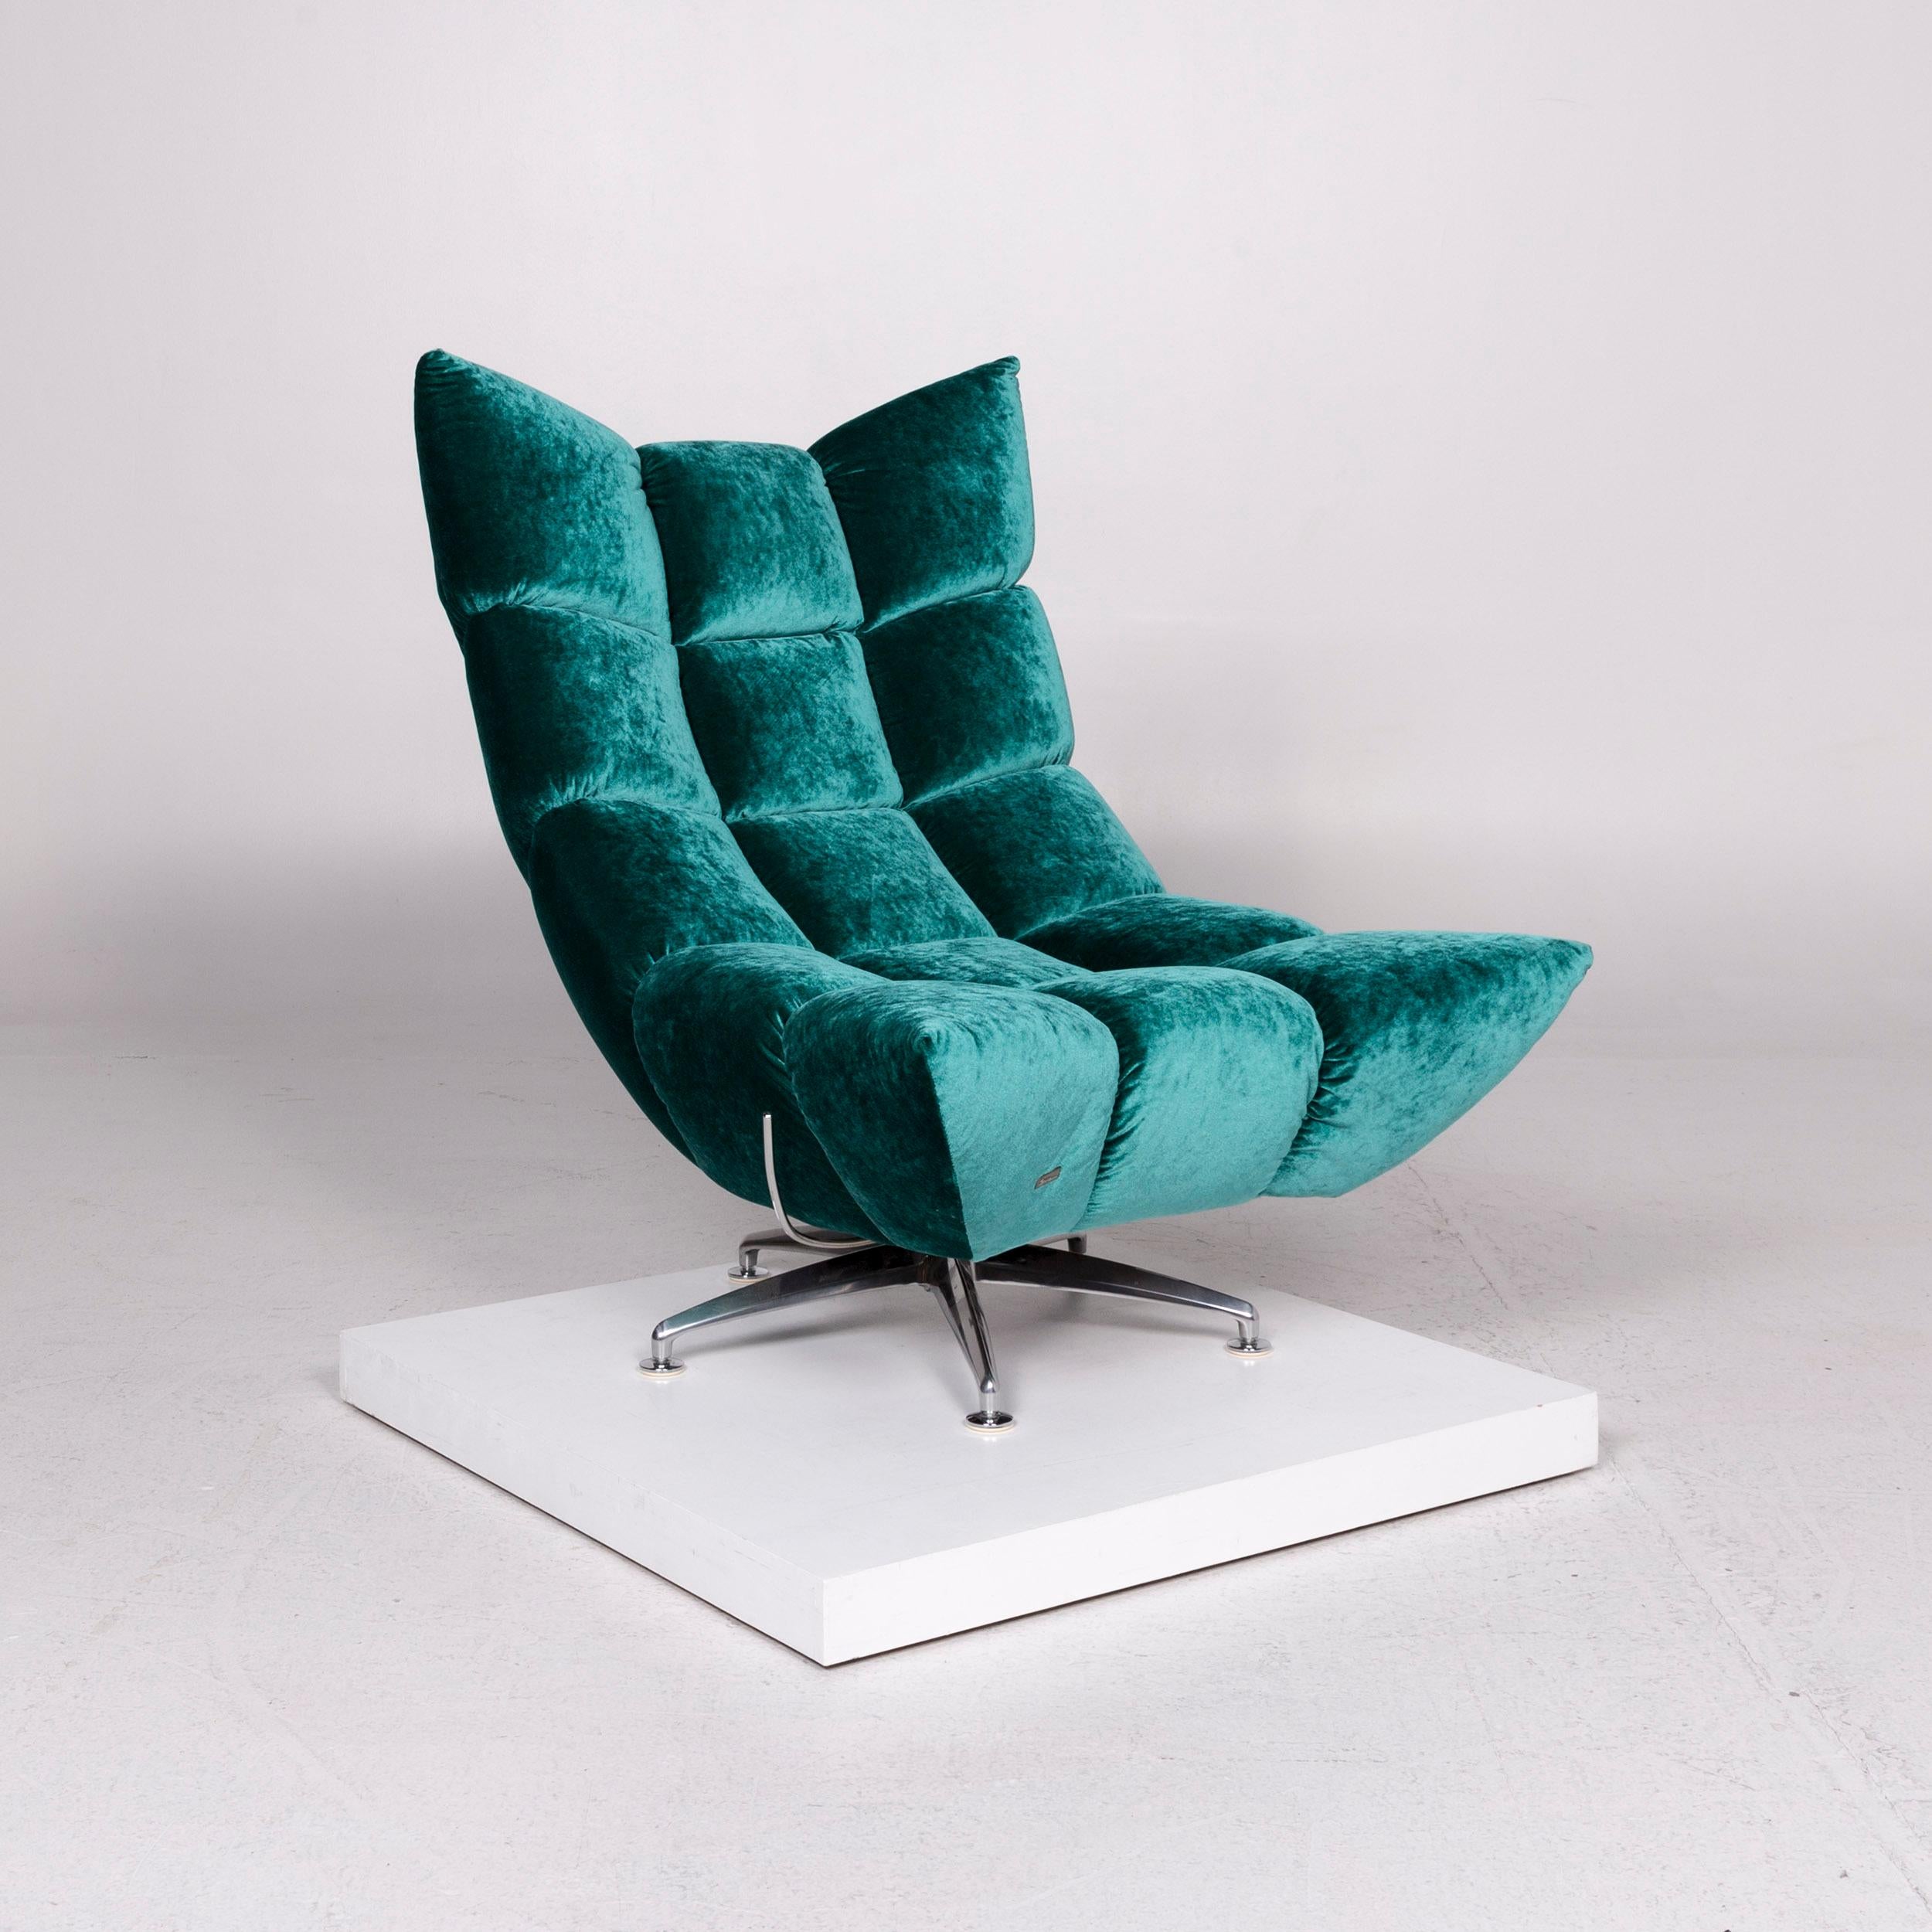 We bring to you a Bretz Hangout velvet fabric armchair blue turquoise function.


 Product measurements in centimeters:
 

Depth 116
Width 84
Height 103
Seat-height 48
Seat-depth 53
Seat-width 84
Back-height 56.

 